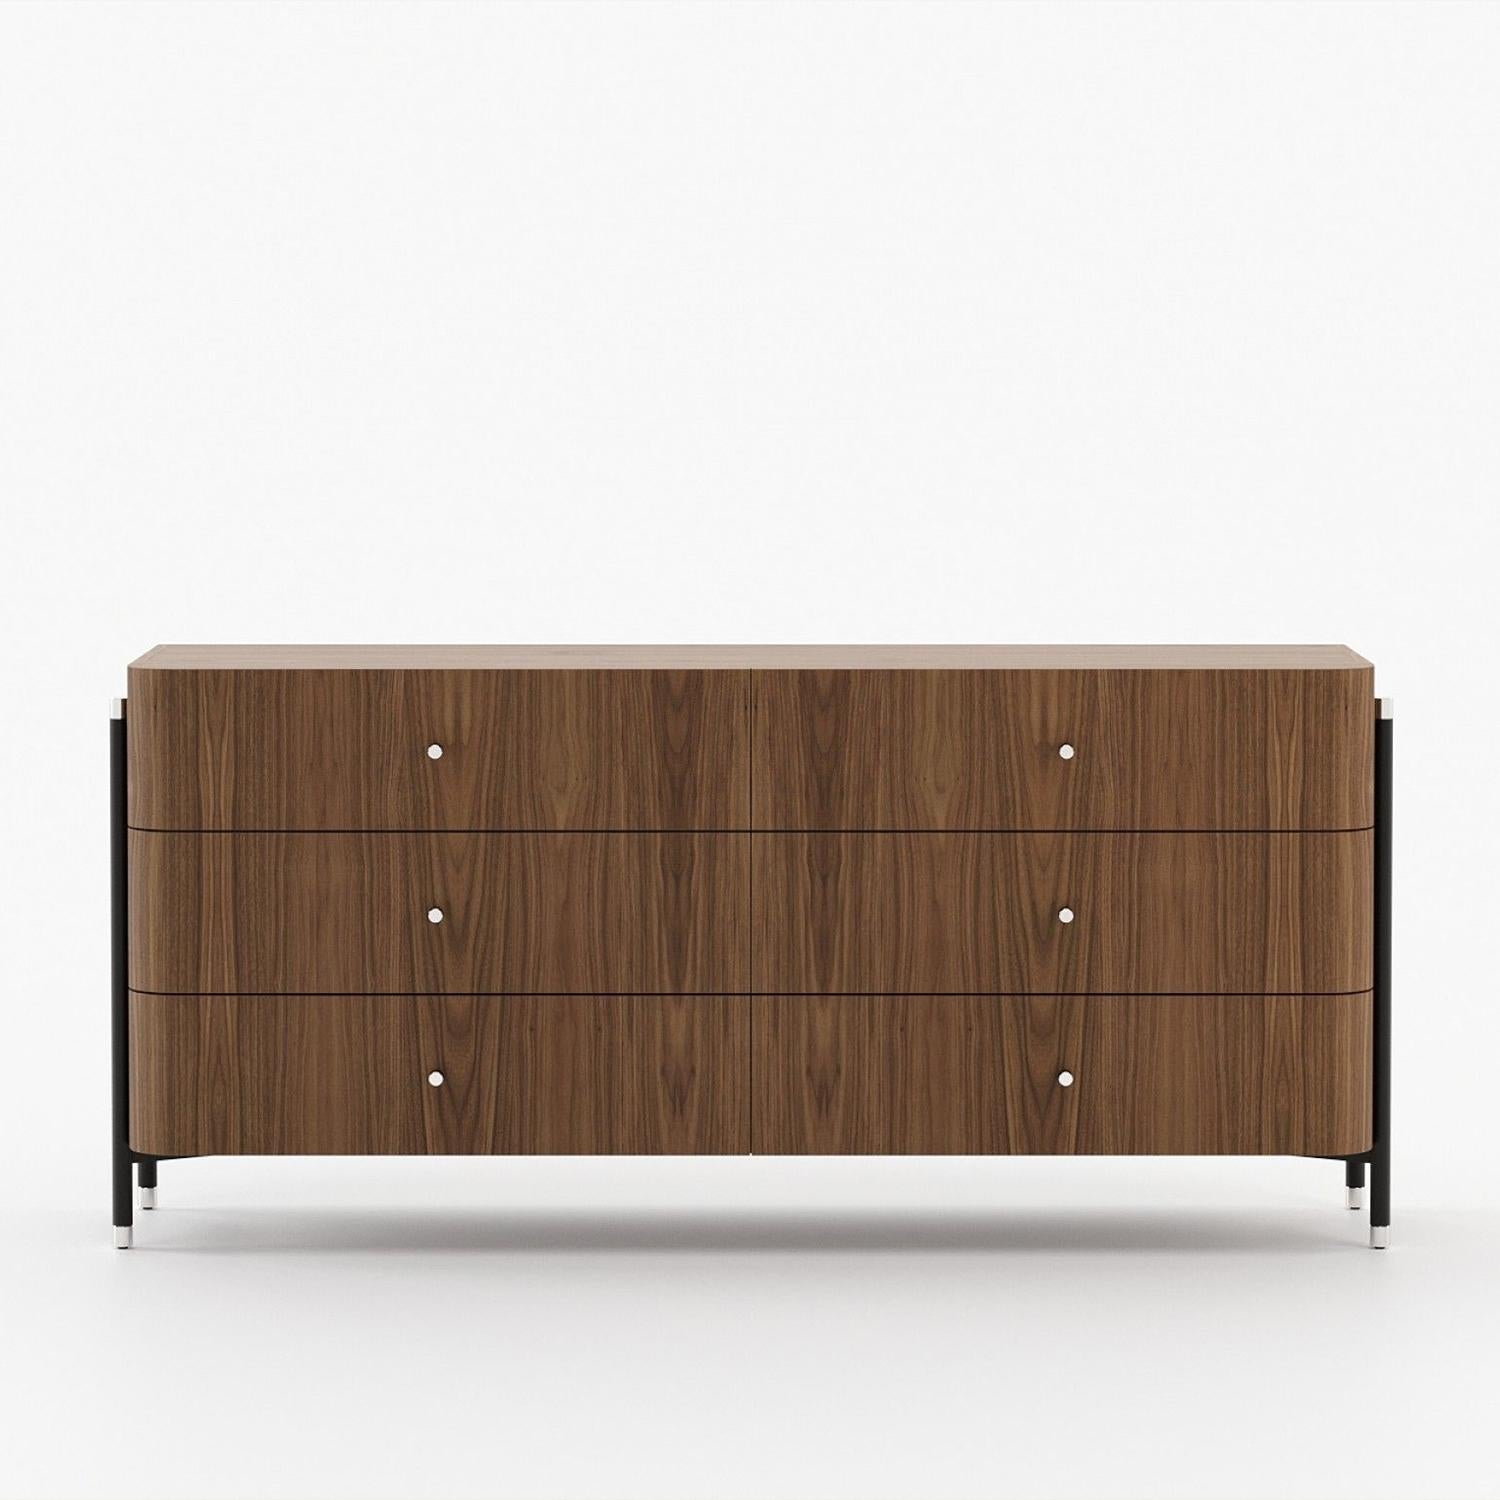 Chest of Drawers Bount Large with structure in walnut wood in matte 
finish, with 6 drawers with easy glide system. With blackened 
steel feet with steel details in polished stainless steel finish.
Also available with other wood finishes on request.